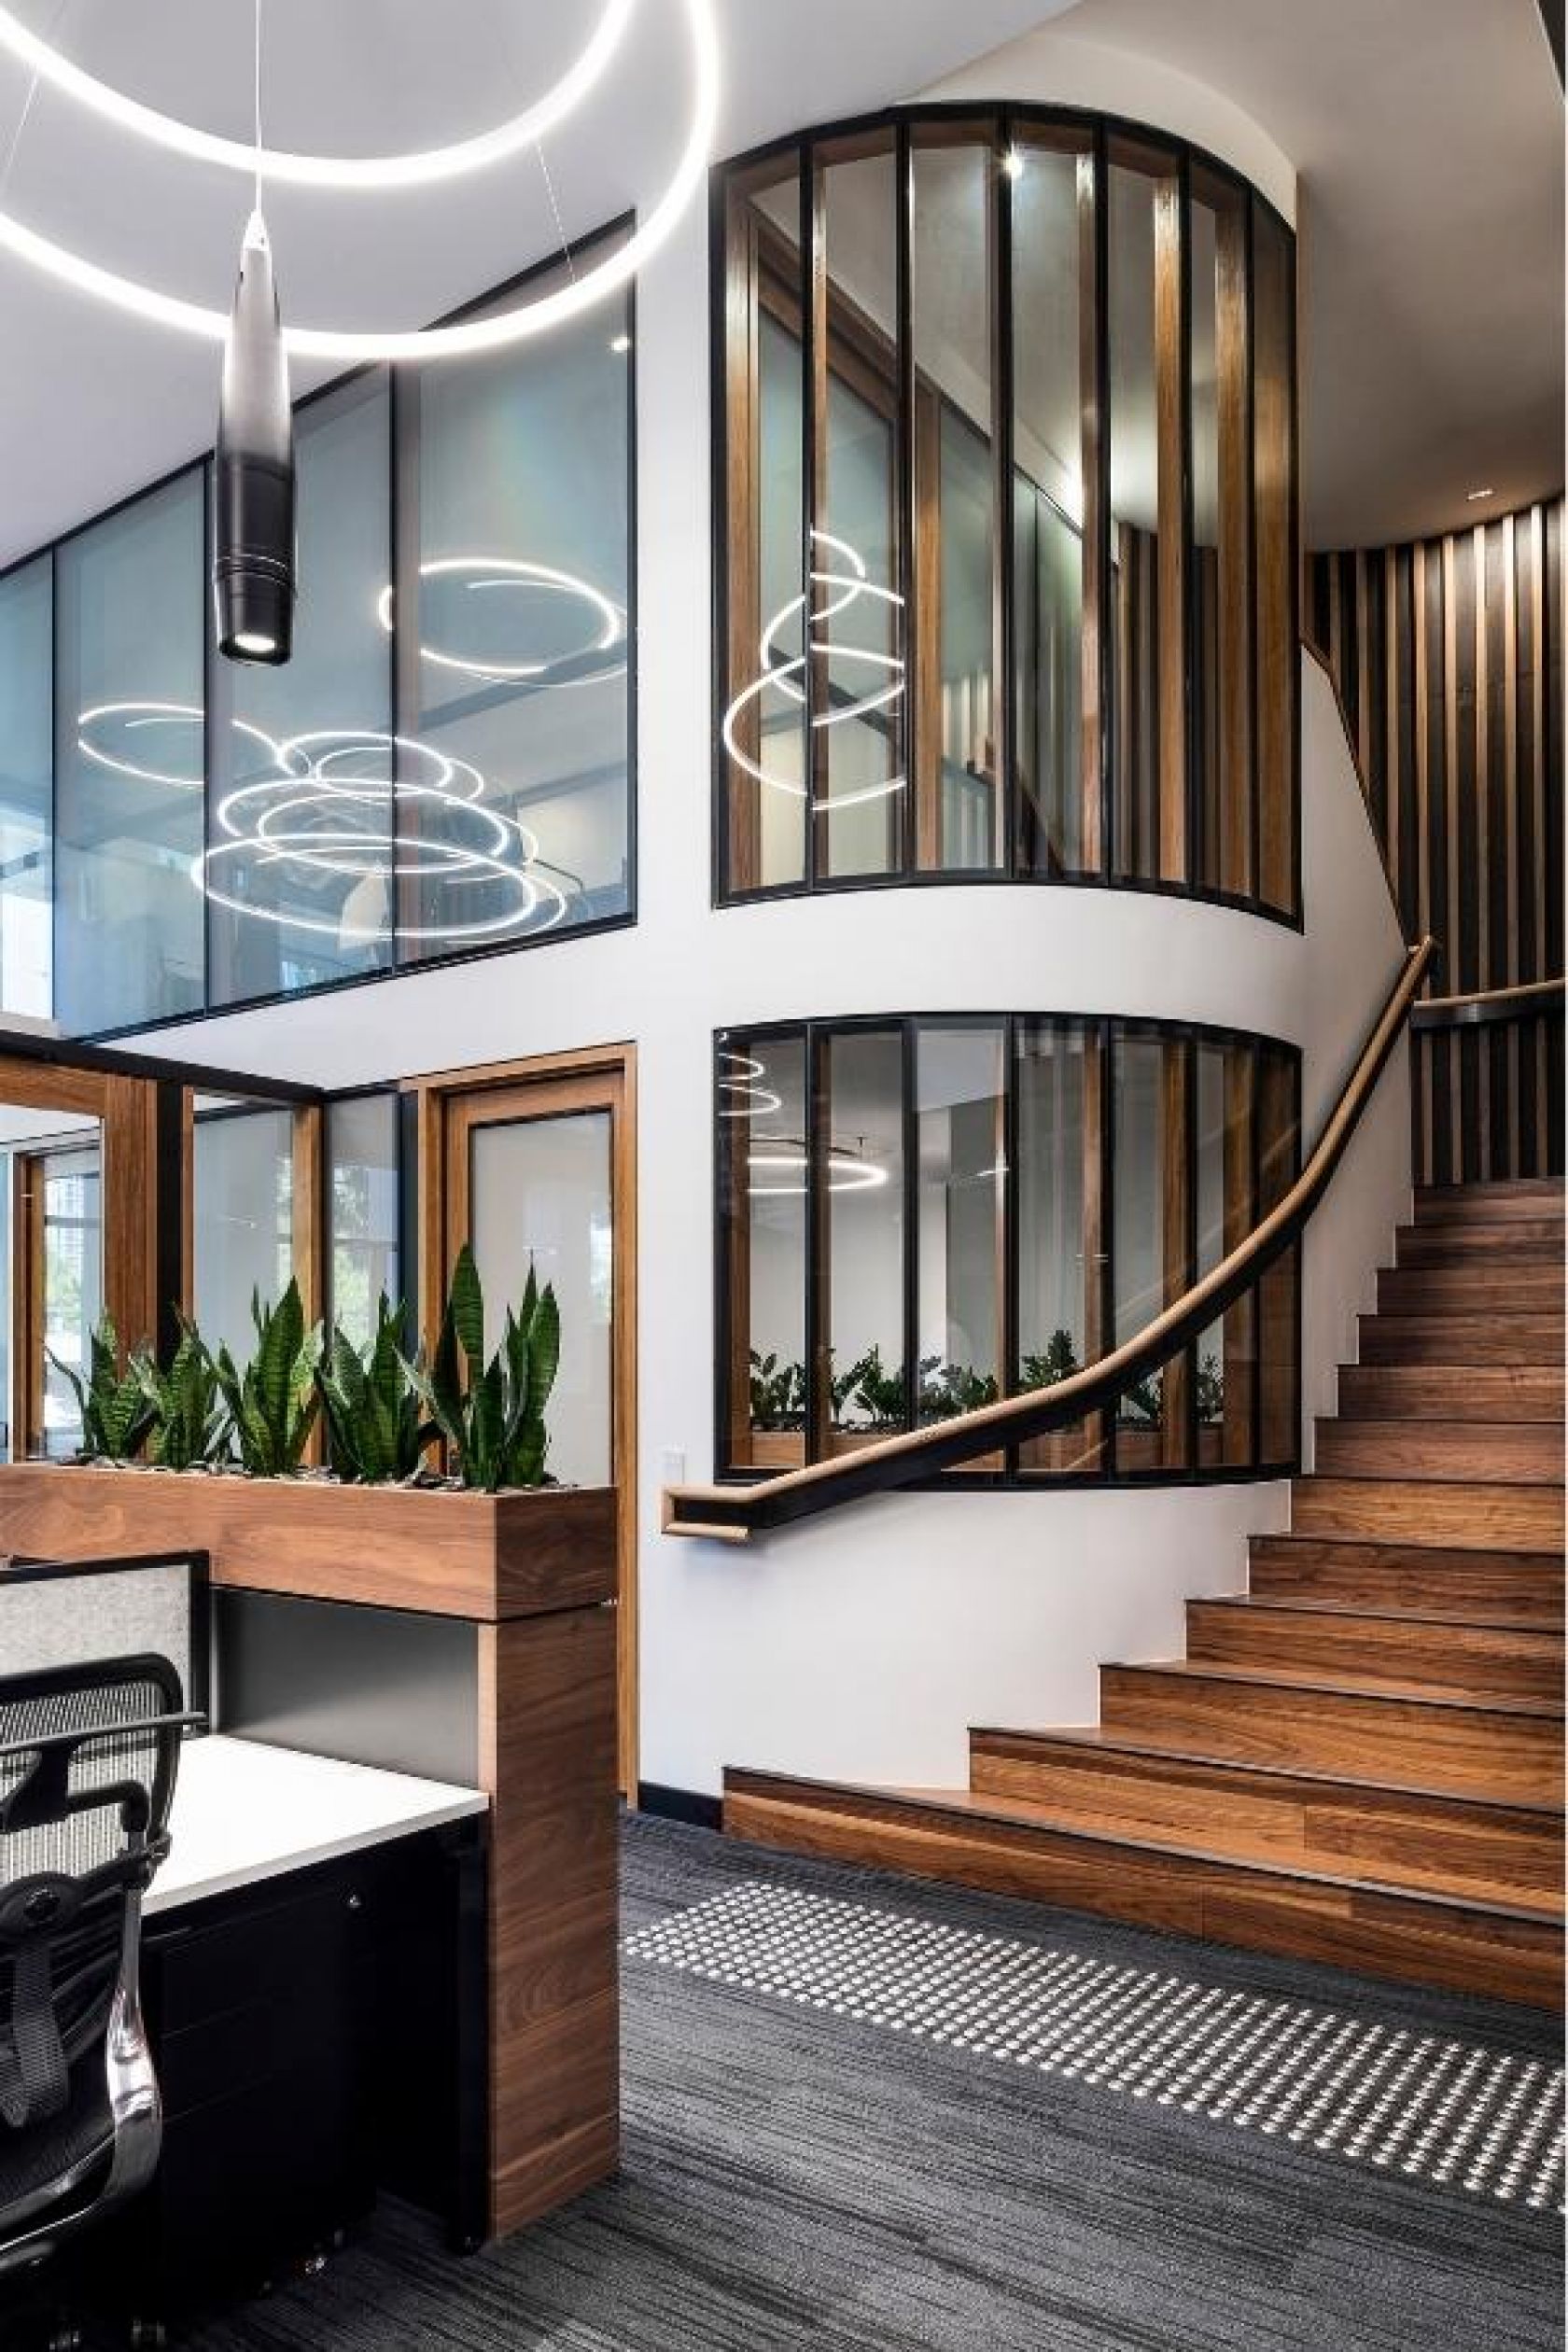 schiavello construction southbank melbourne nioa office fitout curved wall joinery